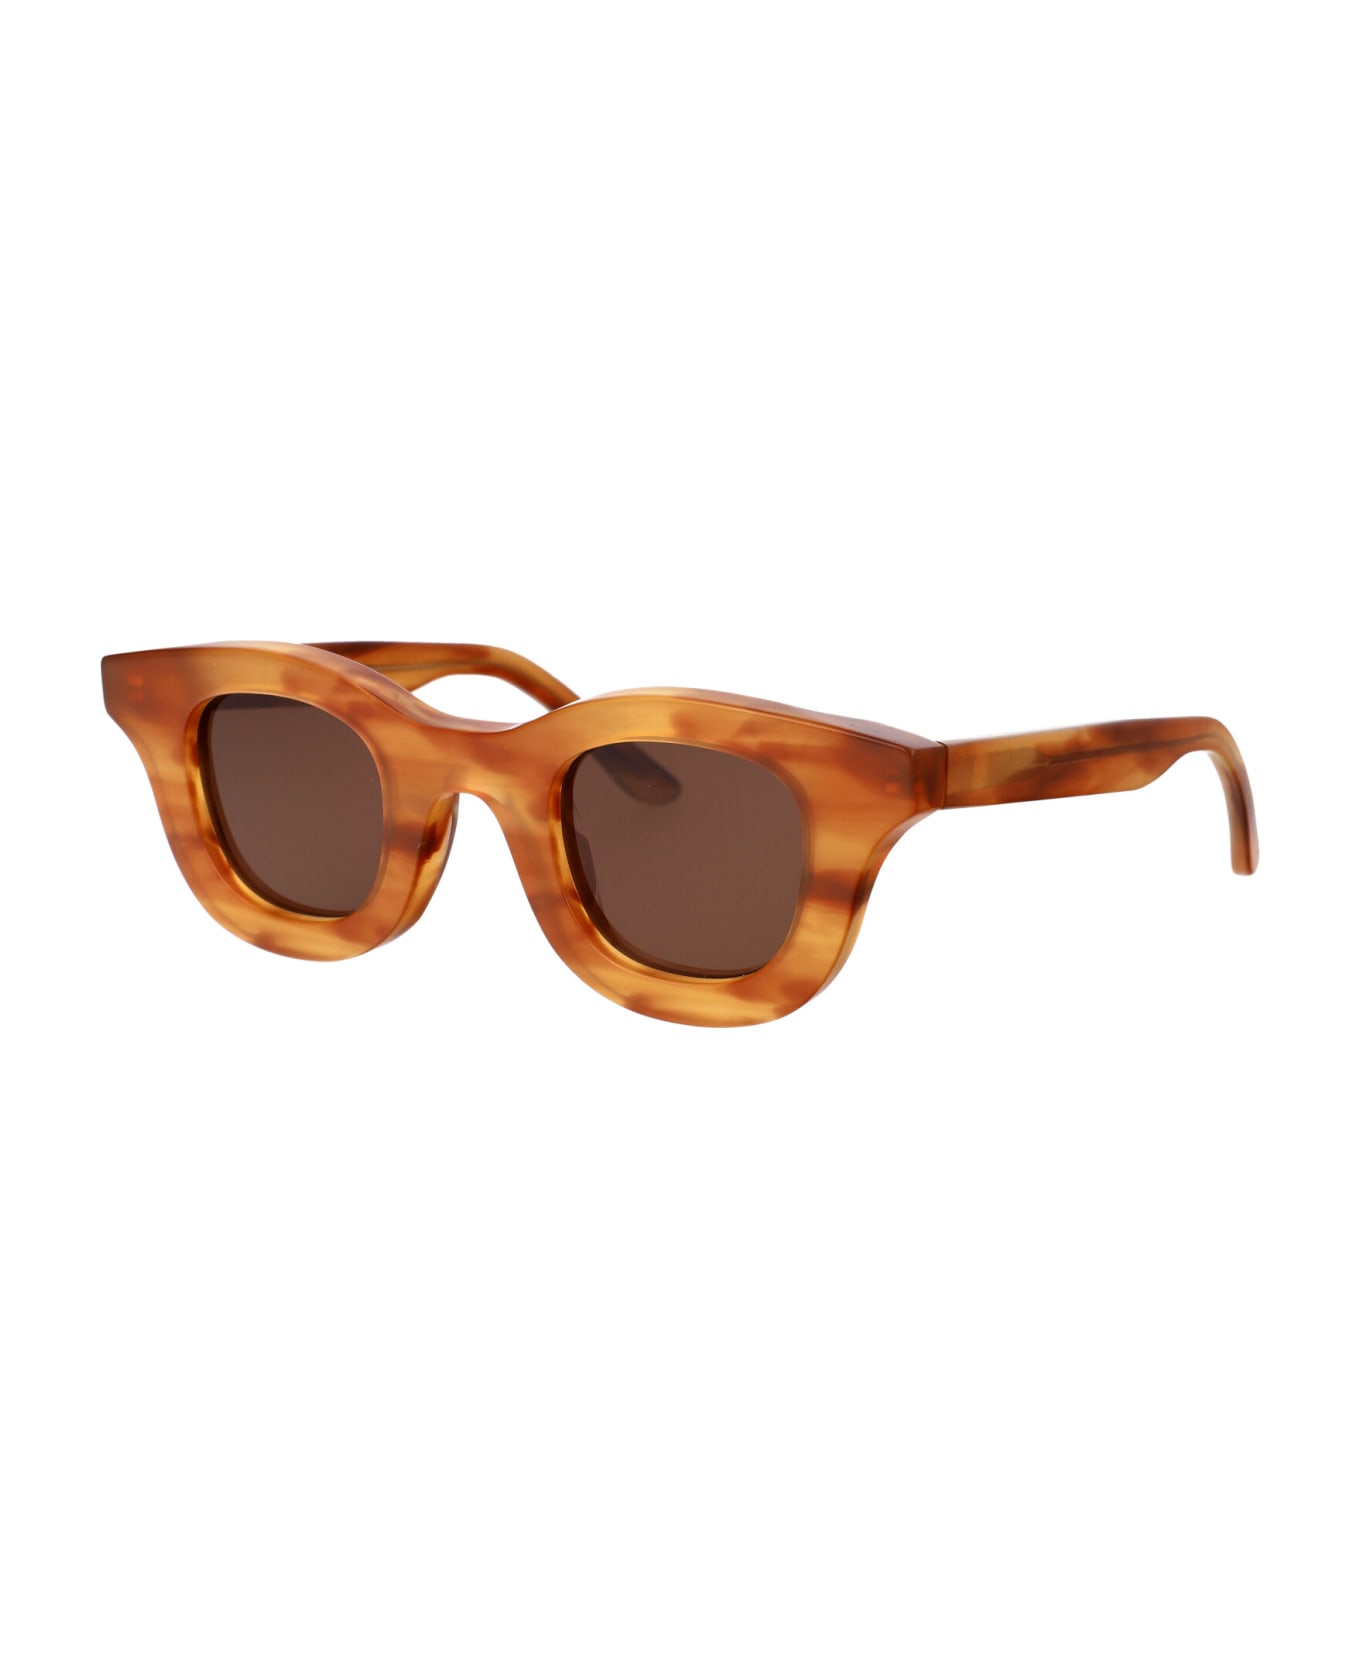 Thierry Lasry Hacktivity Sunglasses - 117 BROWN